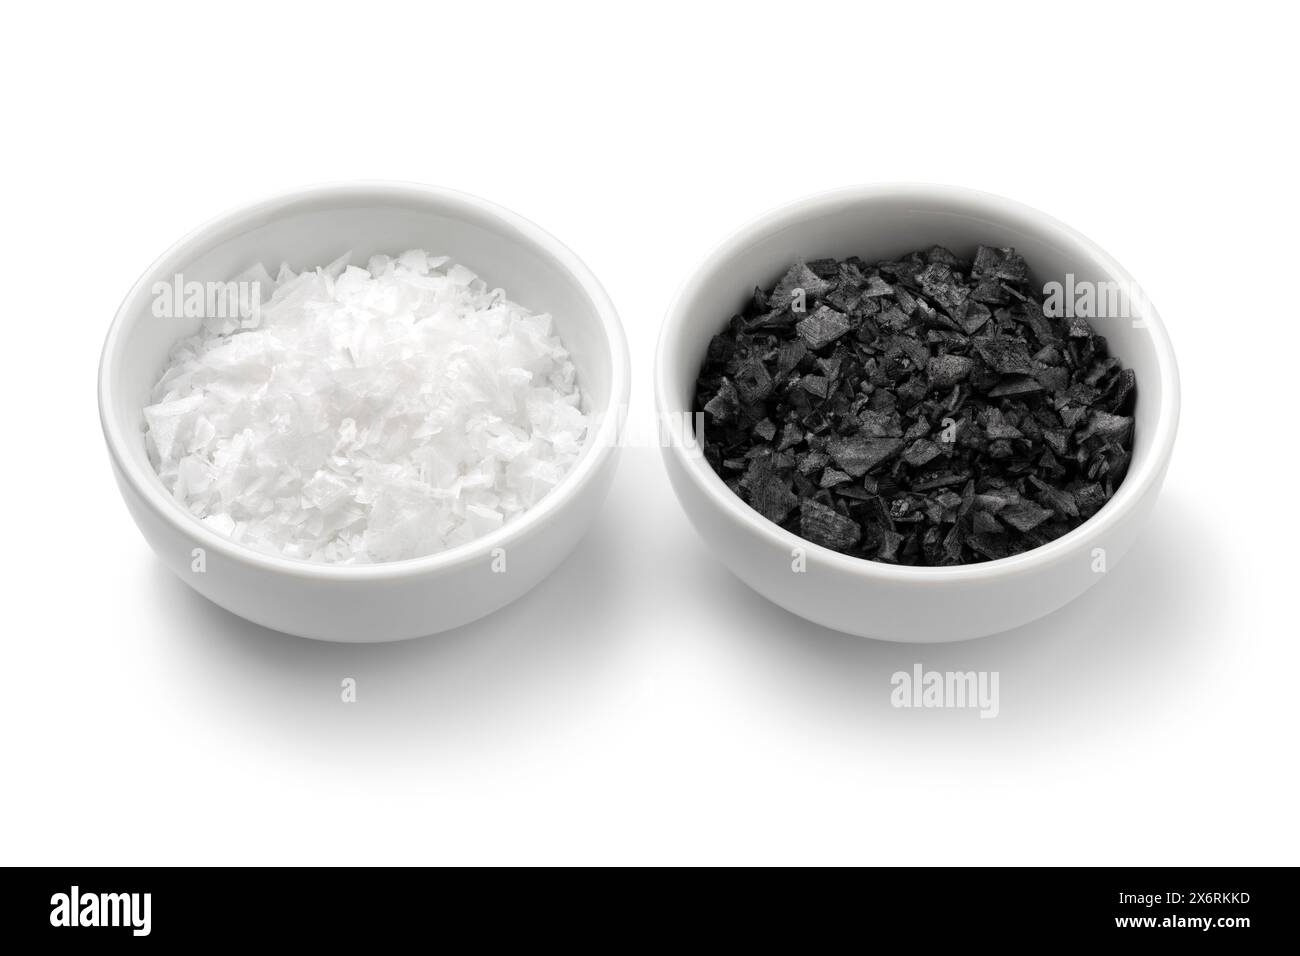 Pair of bowls with black and white sea salt flakes close up isolated on white background Stock Photo